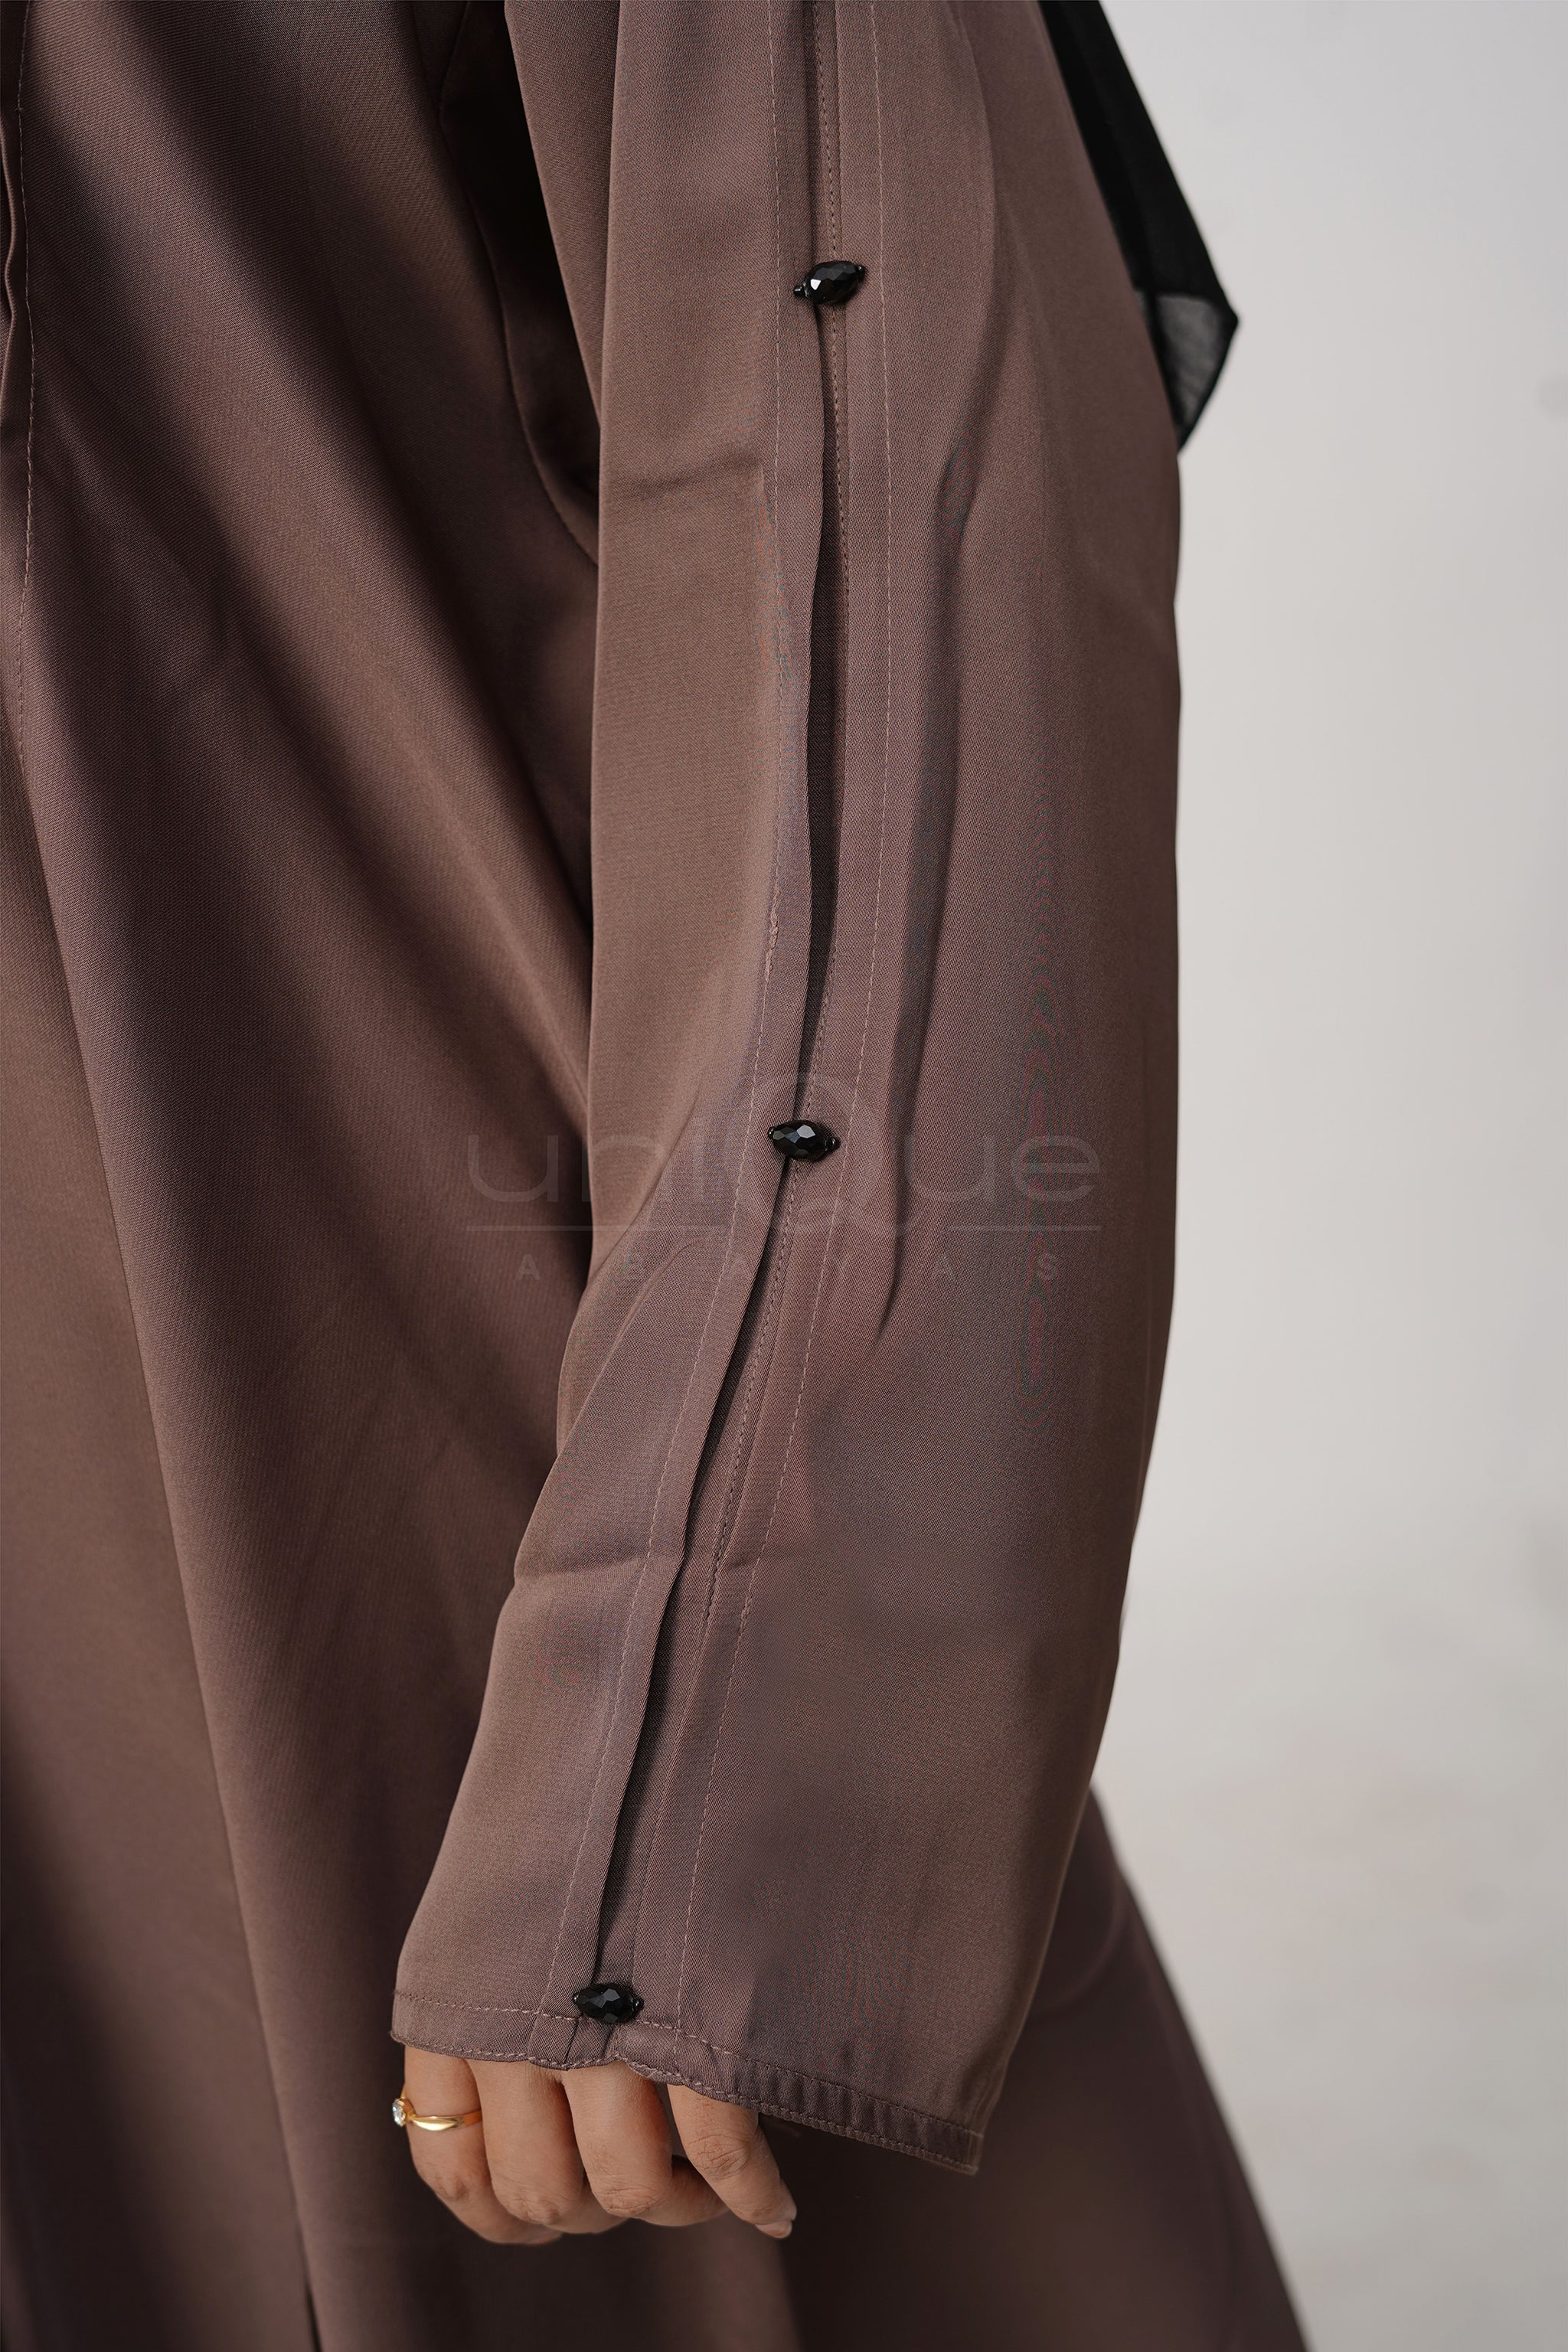 Pleated Stone Brown Abaya by Uniquewallart Abaya for Women, Front Side Close-Up Detailed